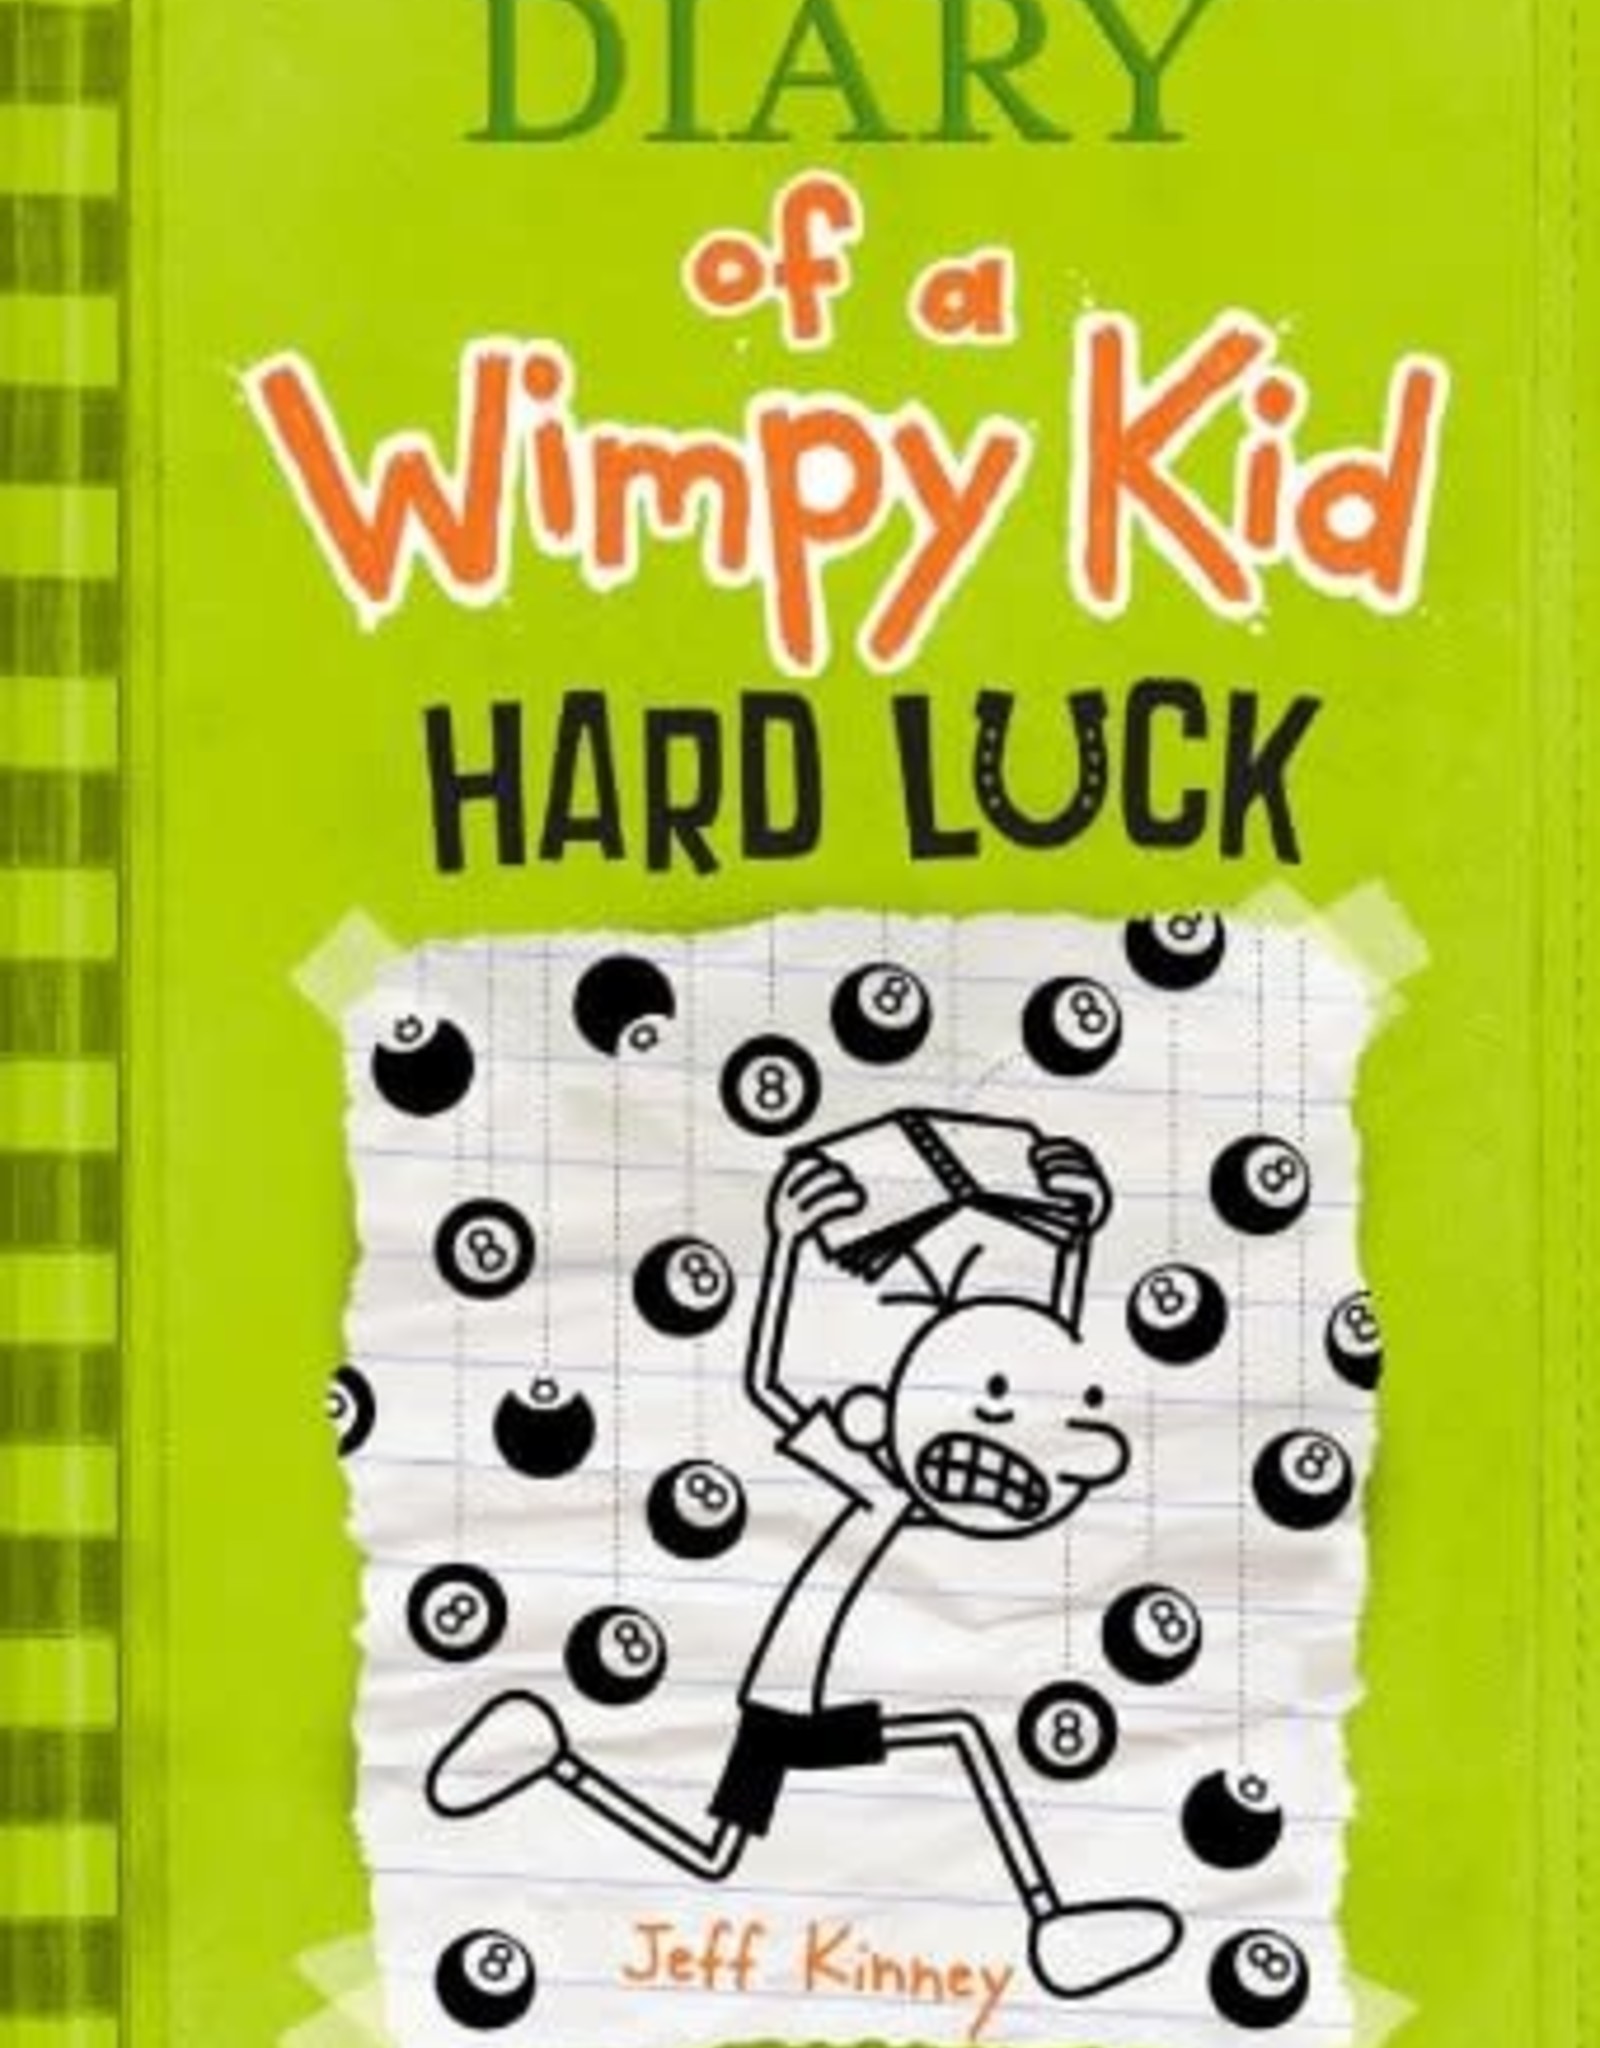 Diary of a Wimpy Kid #8 Hard Luck